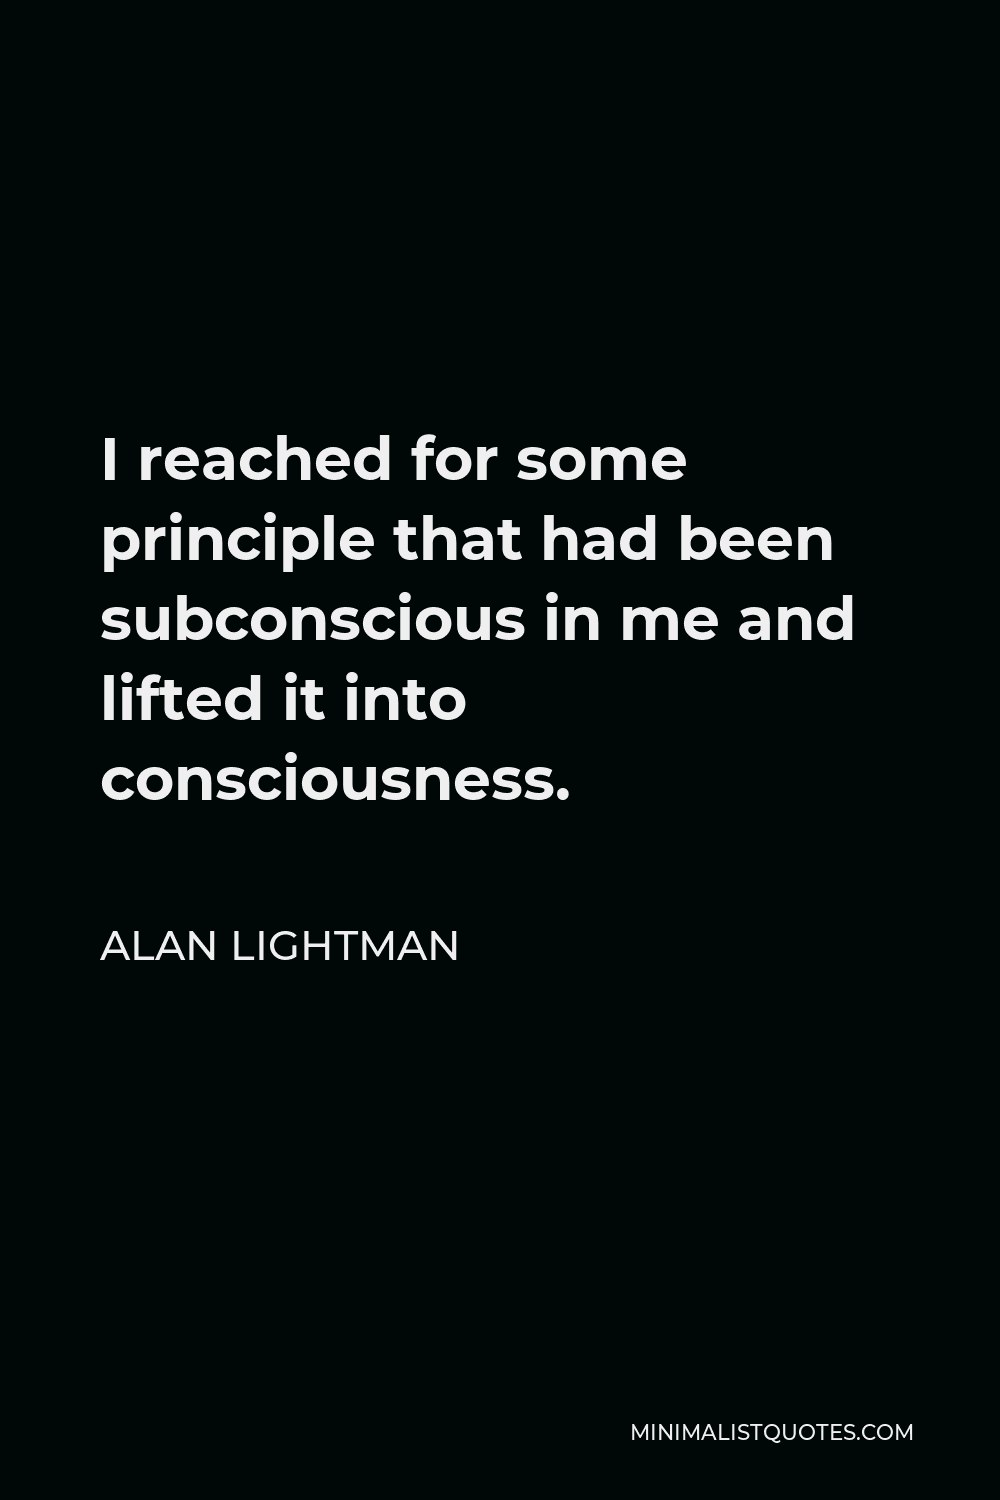 Alan Lightman Quote - I reached for some principle that had been subconscious in me and lifted it into consciousness.